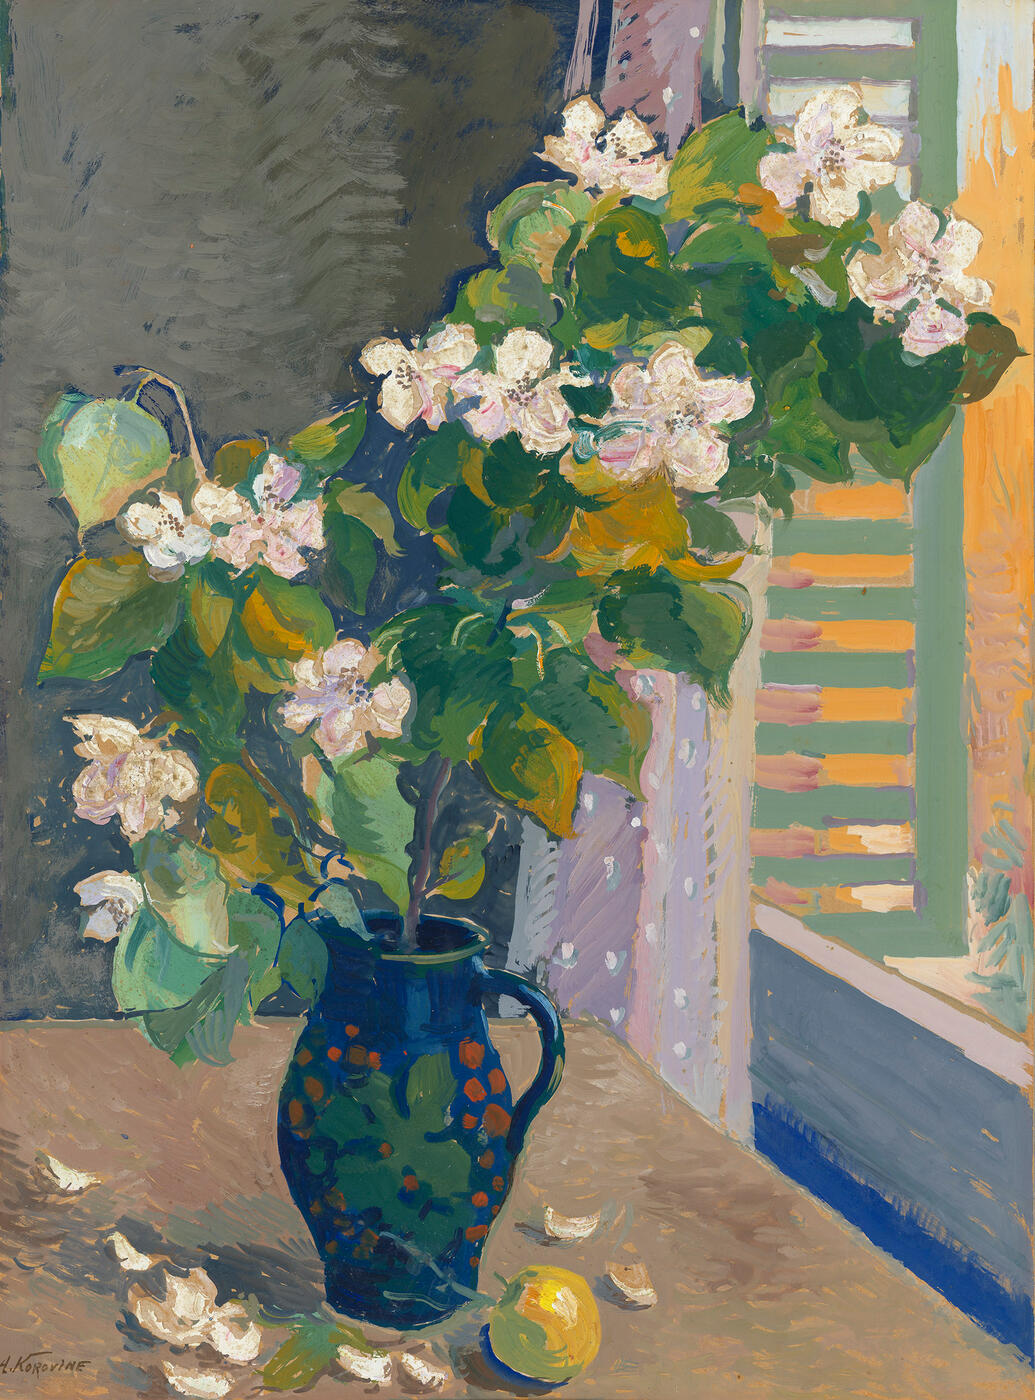 Blossoming Branch in a Jug by the Window